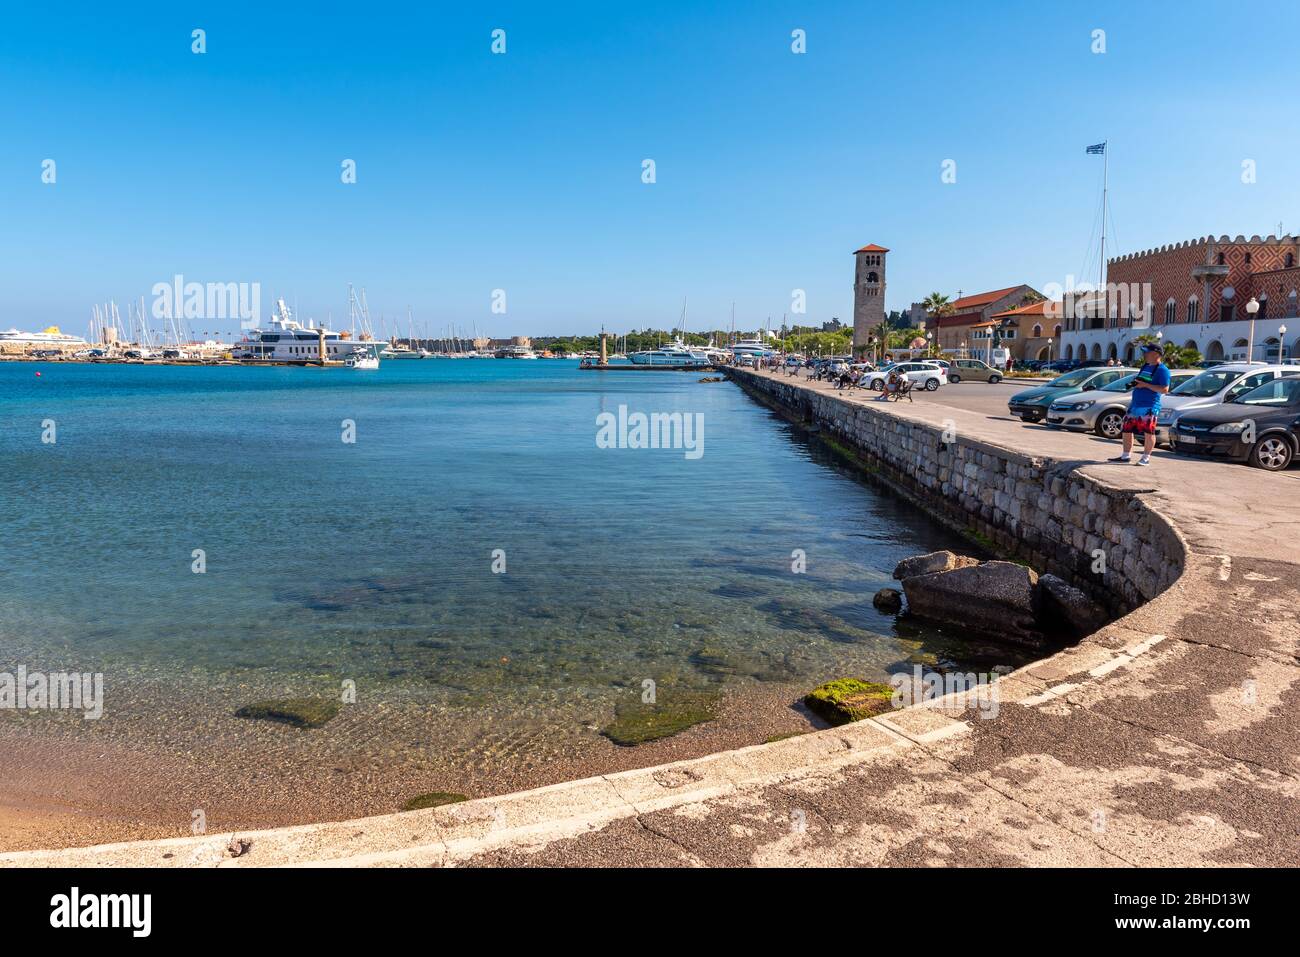 RHODES, GREECE - May 13, 2018: Waterfront promenade in Rhodes town Stock Photo